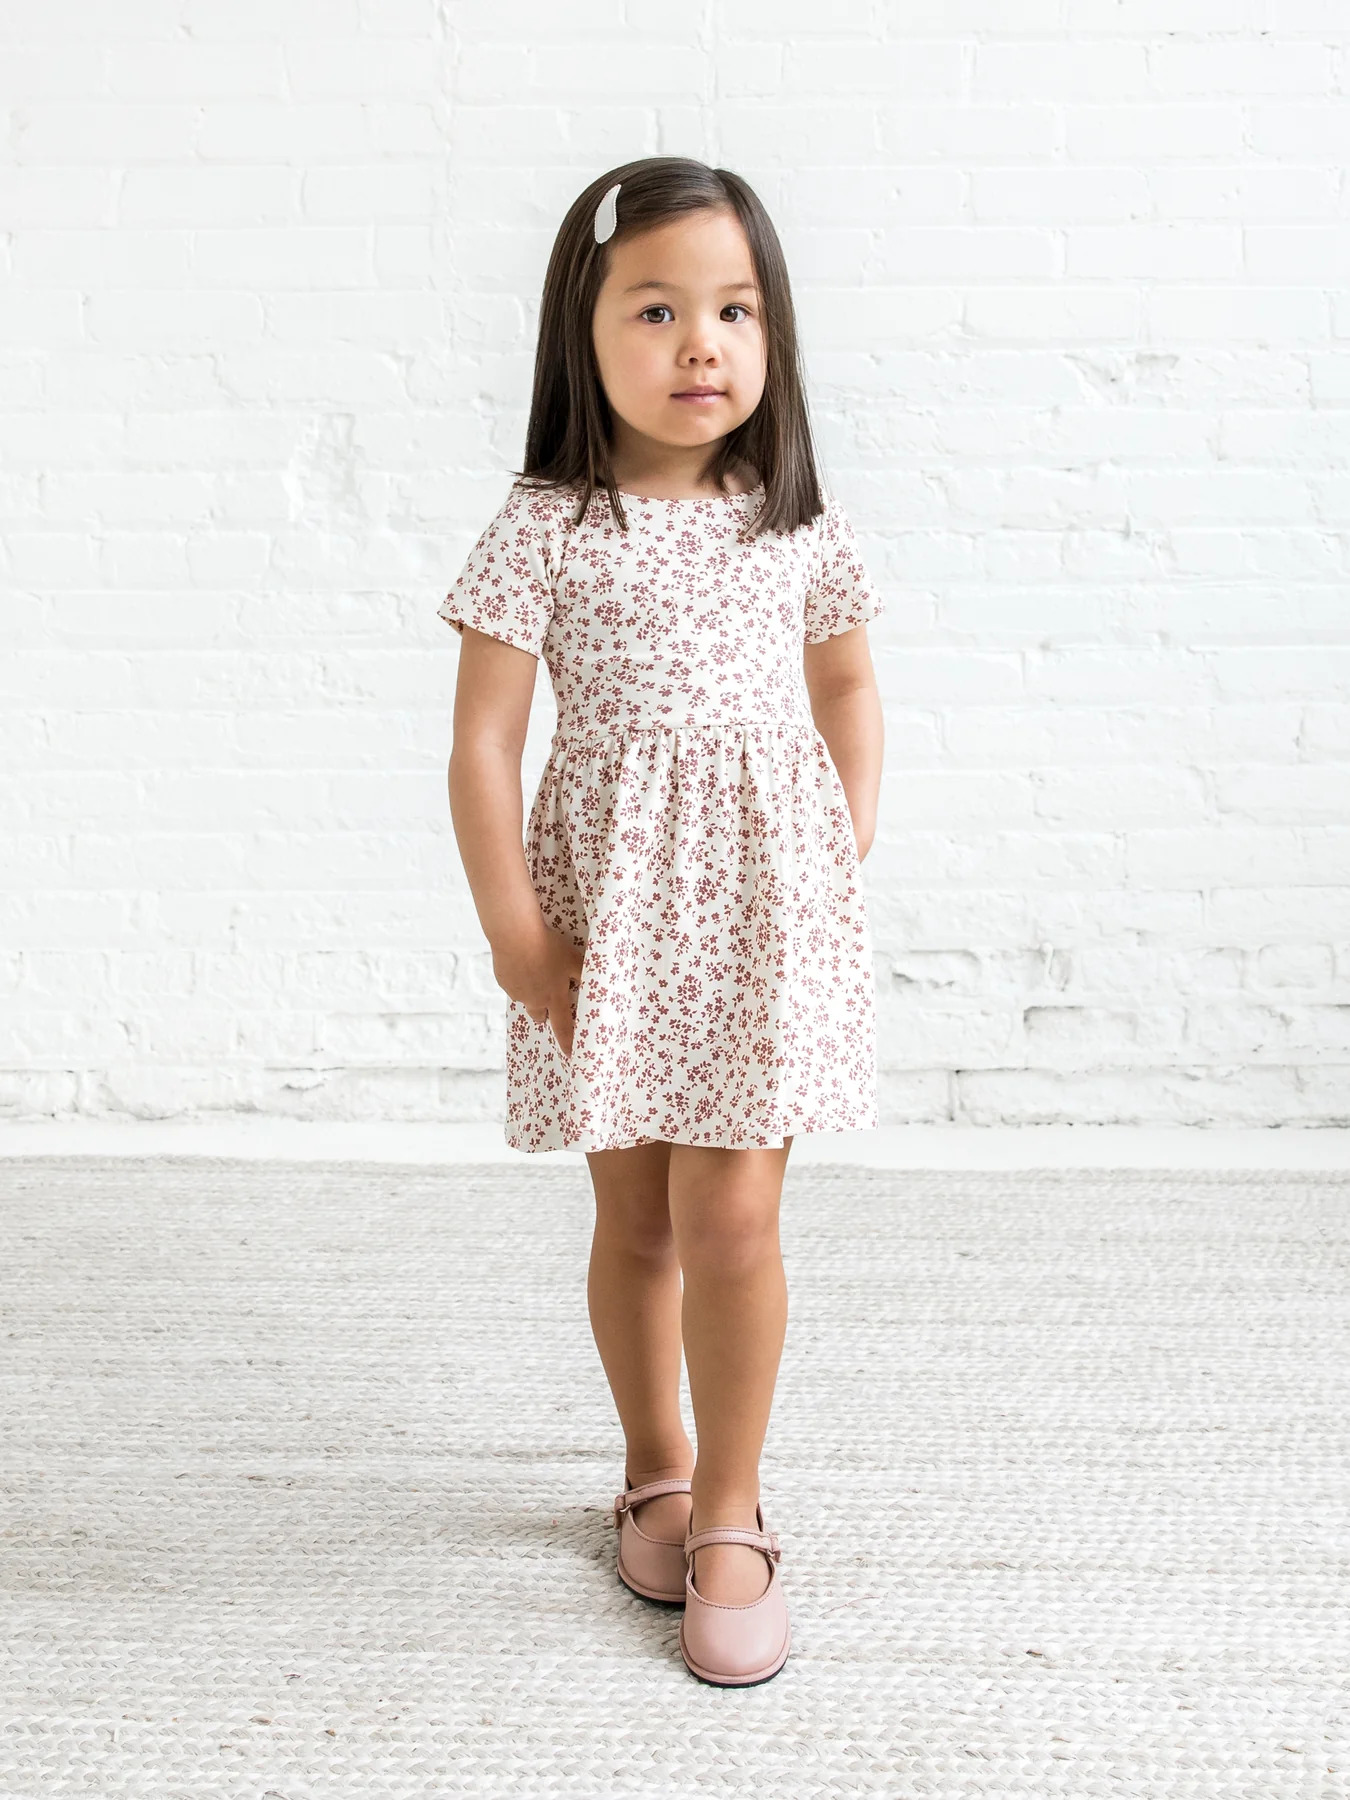 A little girl in a pink floral dress standing in front of a white wall.